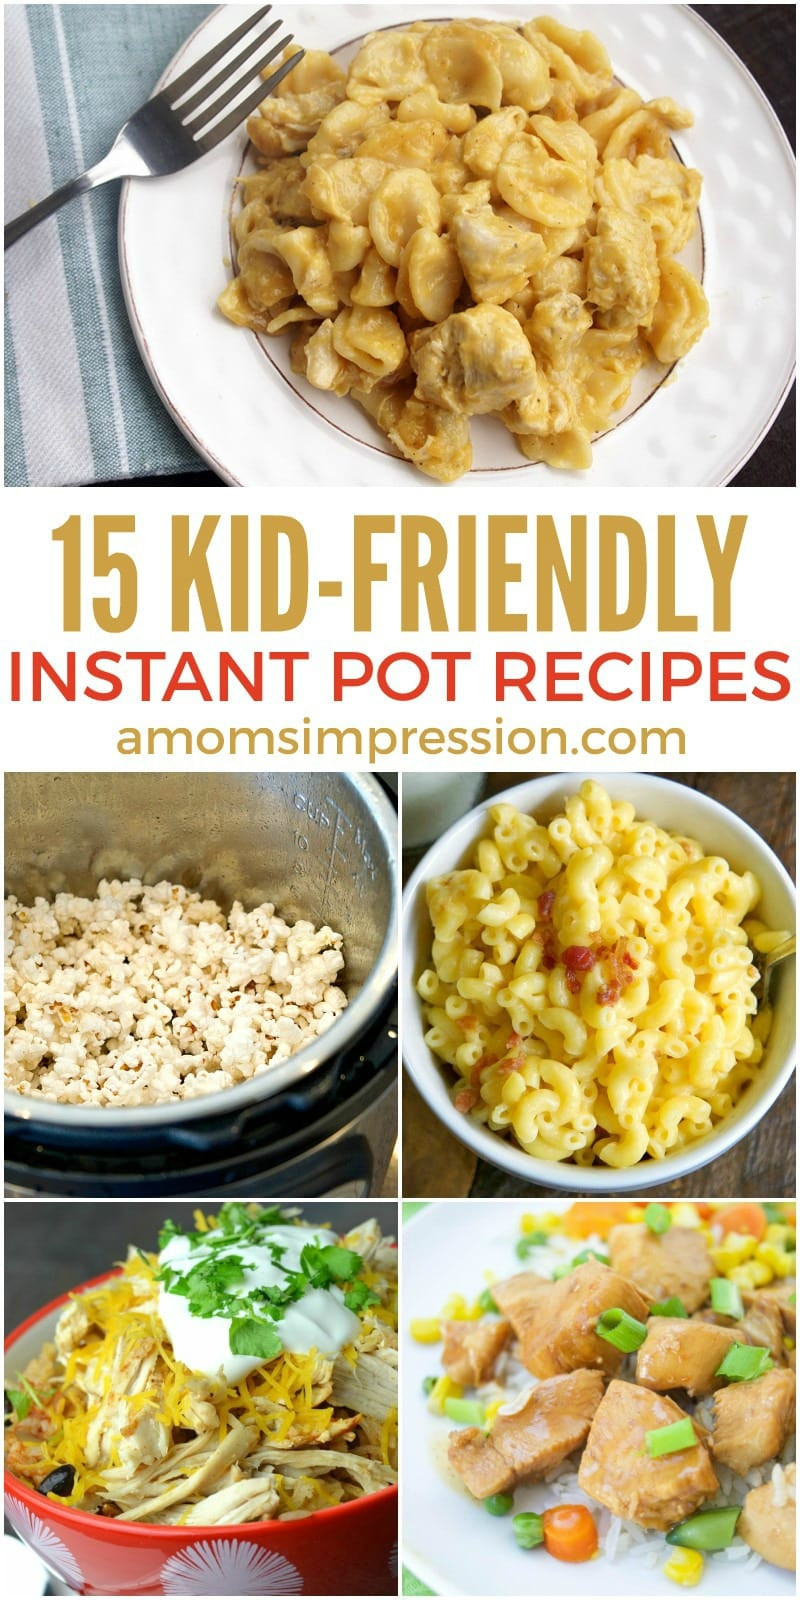 Fast Kid Friendly Dinners
 25 Quick and Easy Kid Friendly Instant Pot Recipes A Mom